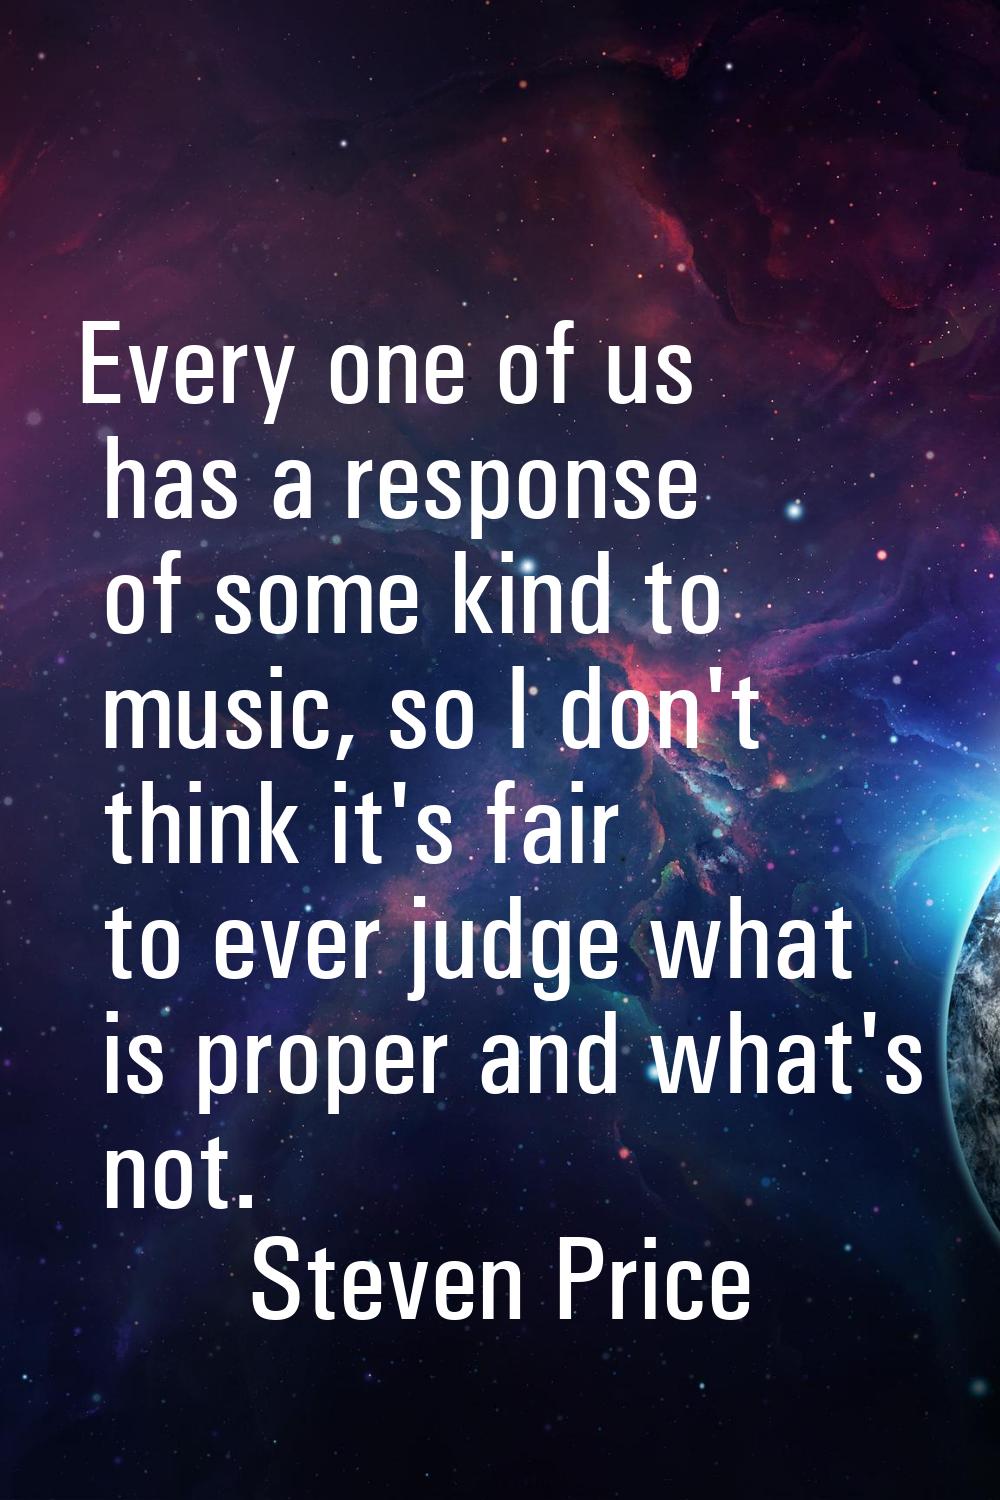 Every one of us has a response of some kind to music, so I don't think it's fair to ever judge what